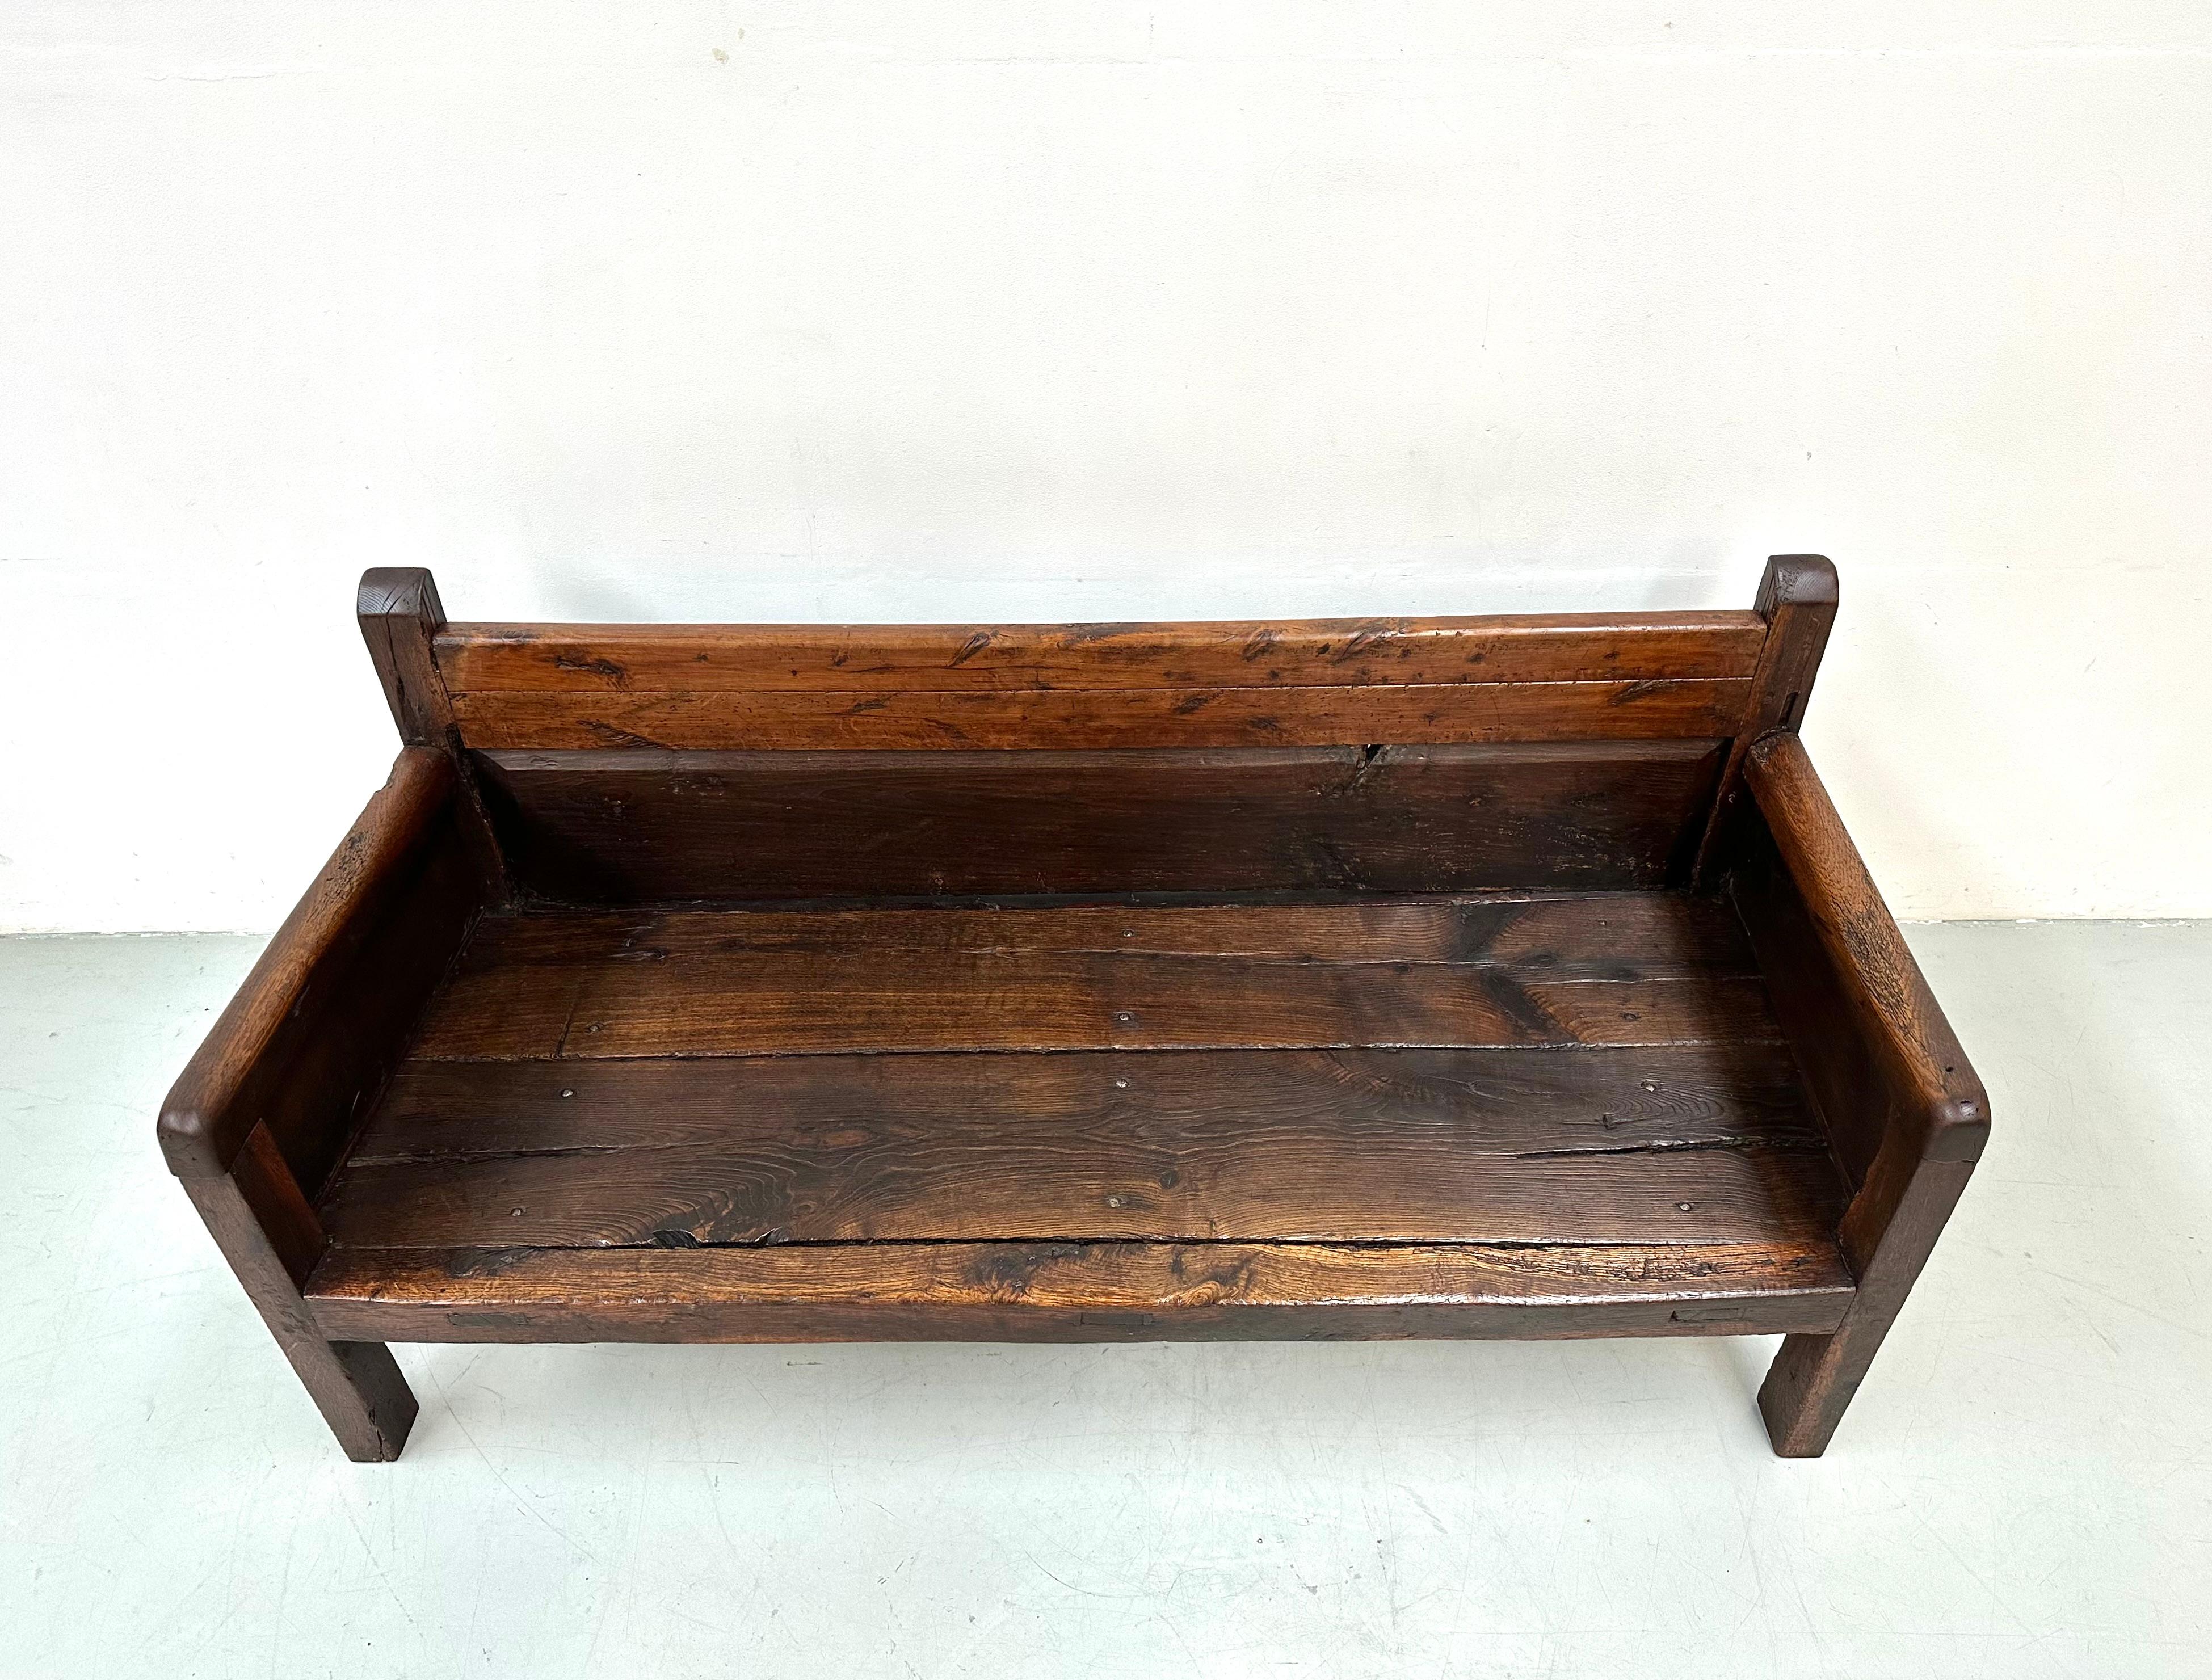 Antique Handmade Minimalistic Spanish Chestnut Wood Bench, Early 19th Century For Sale 5